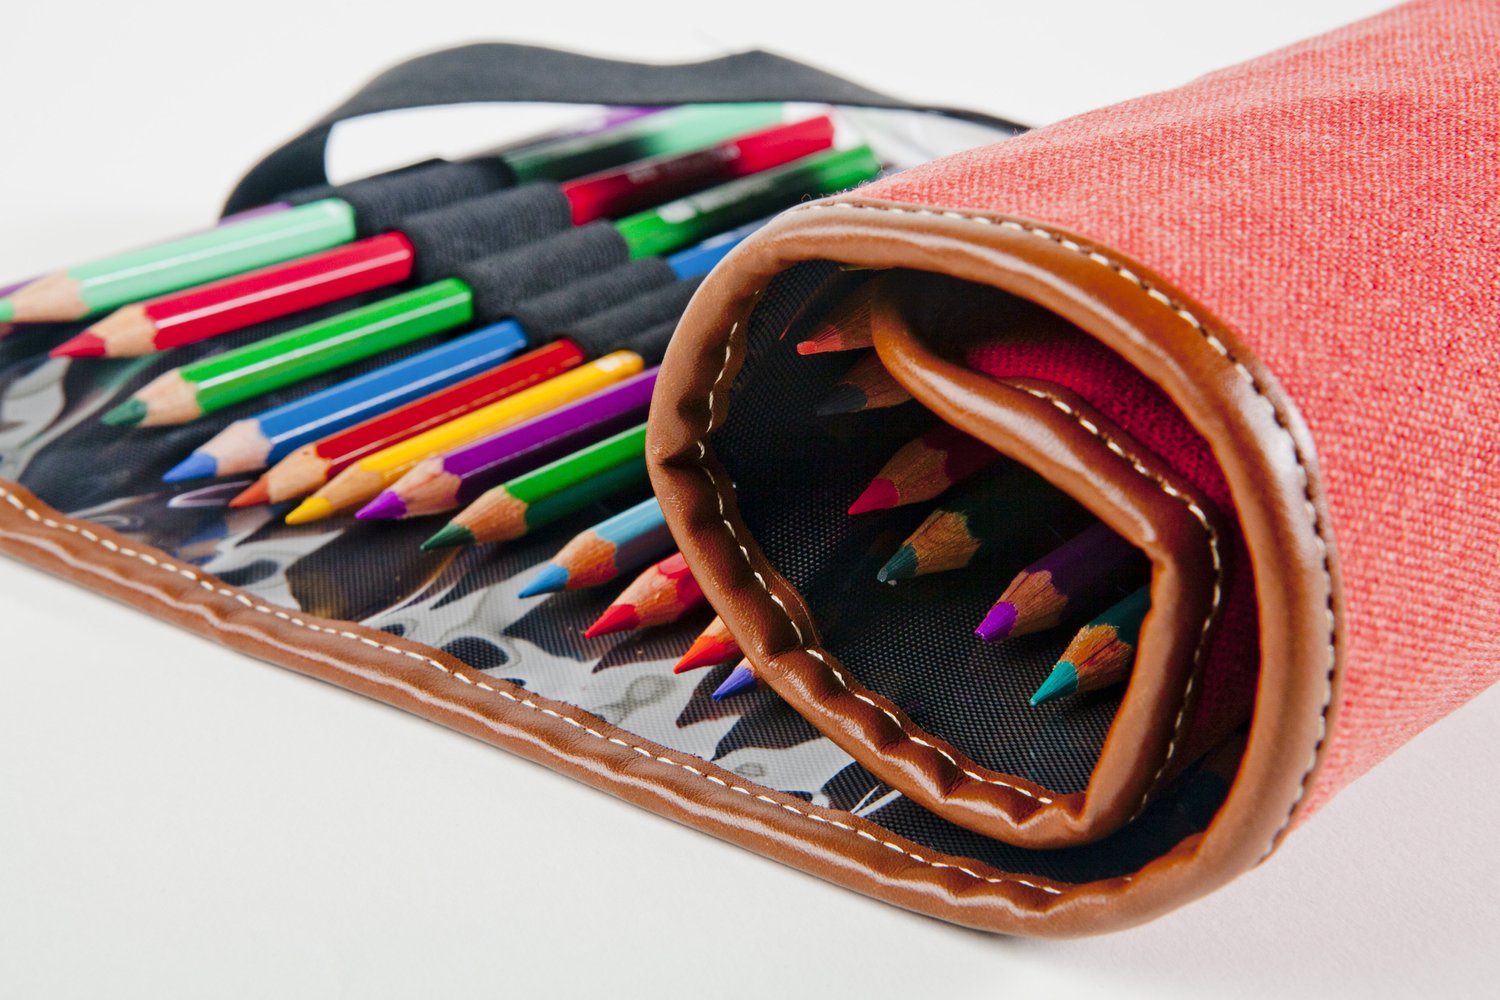 Speedball Canvas Roll Up Pencil Case, Denim W/Brown Trim, Holds Up To 36  Pencils